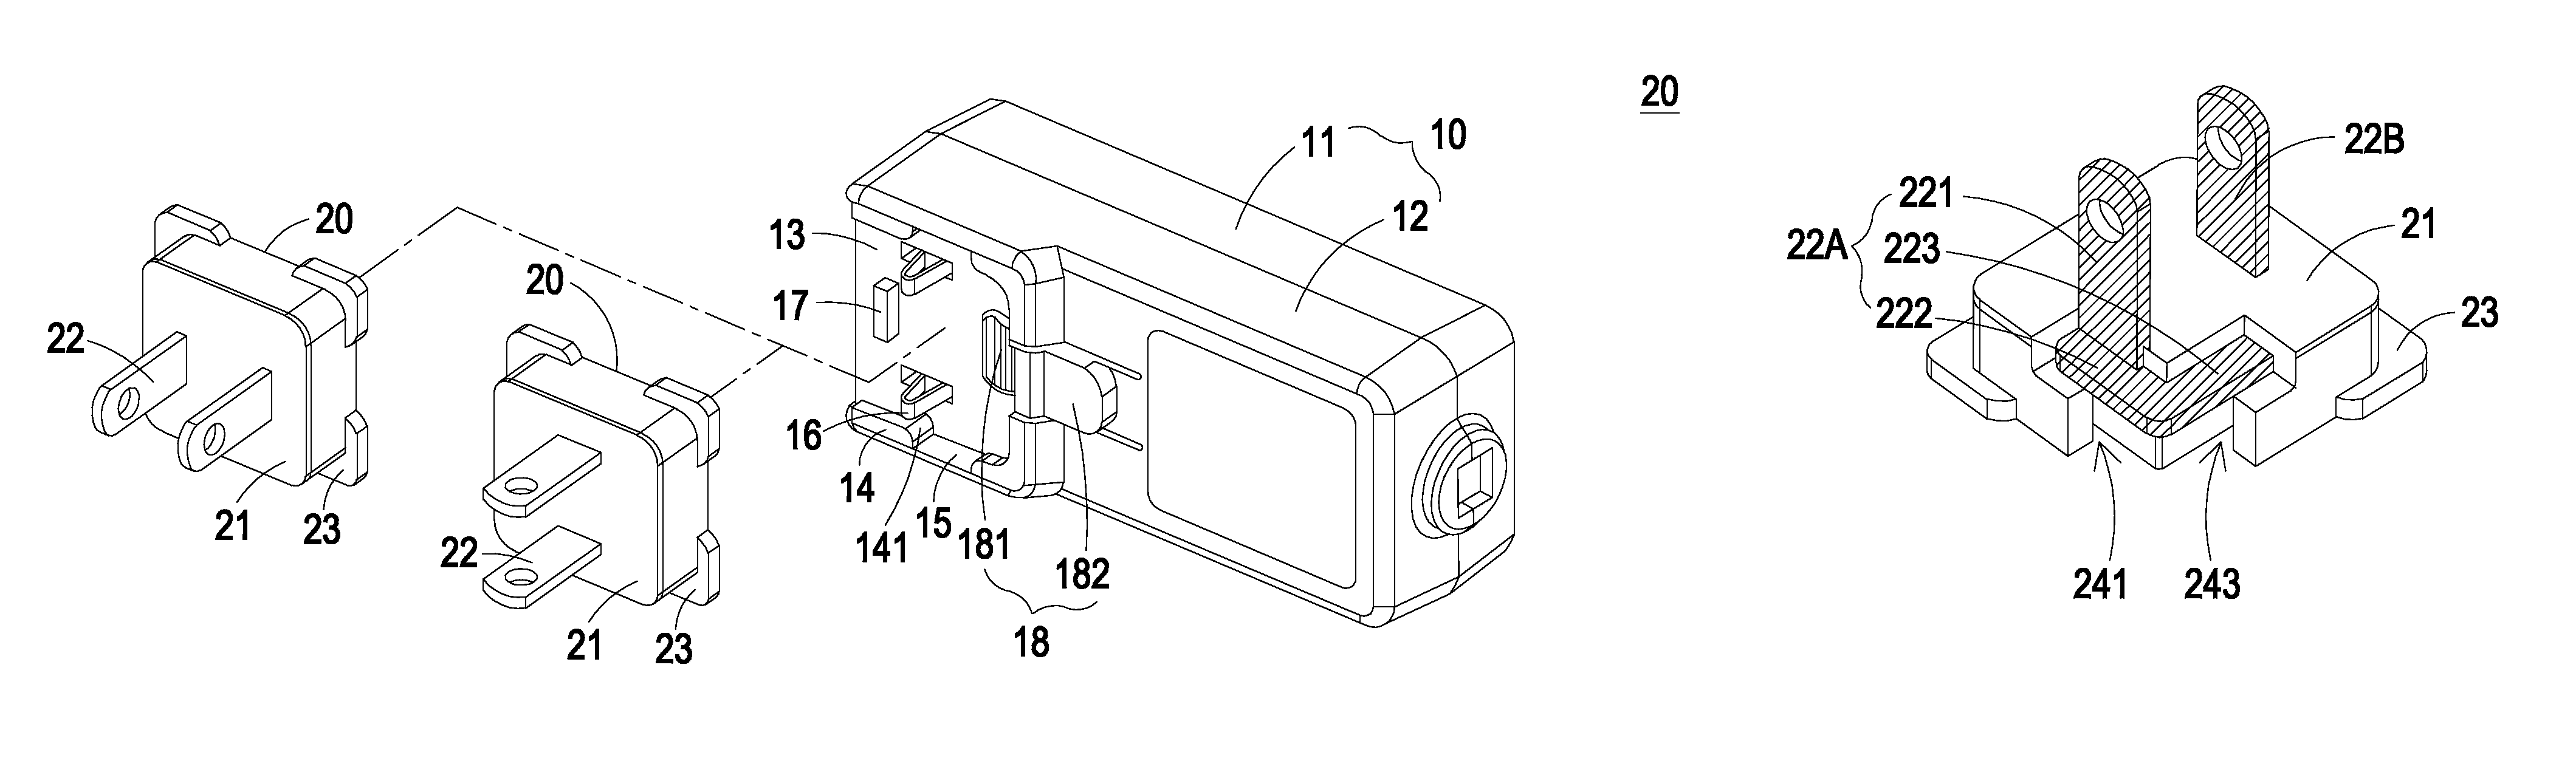 Electronic device with detachable plug capable of changing plugging direction